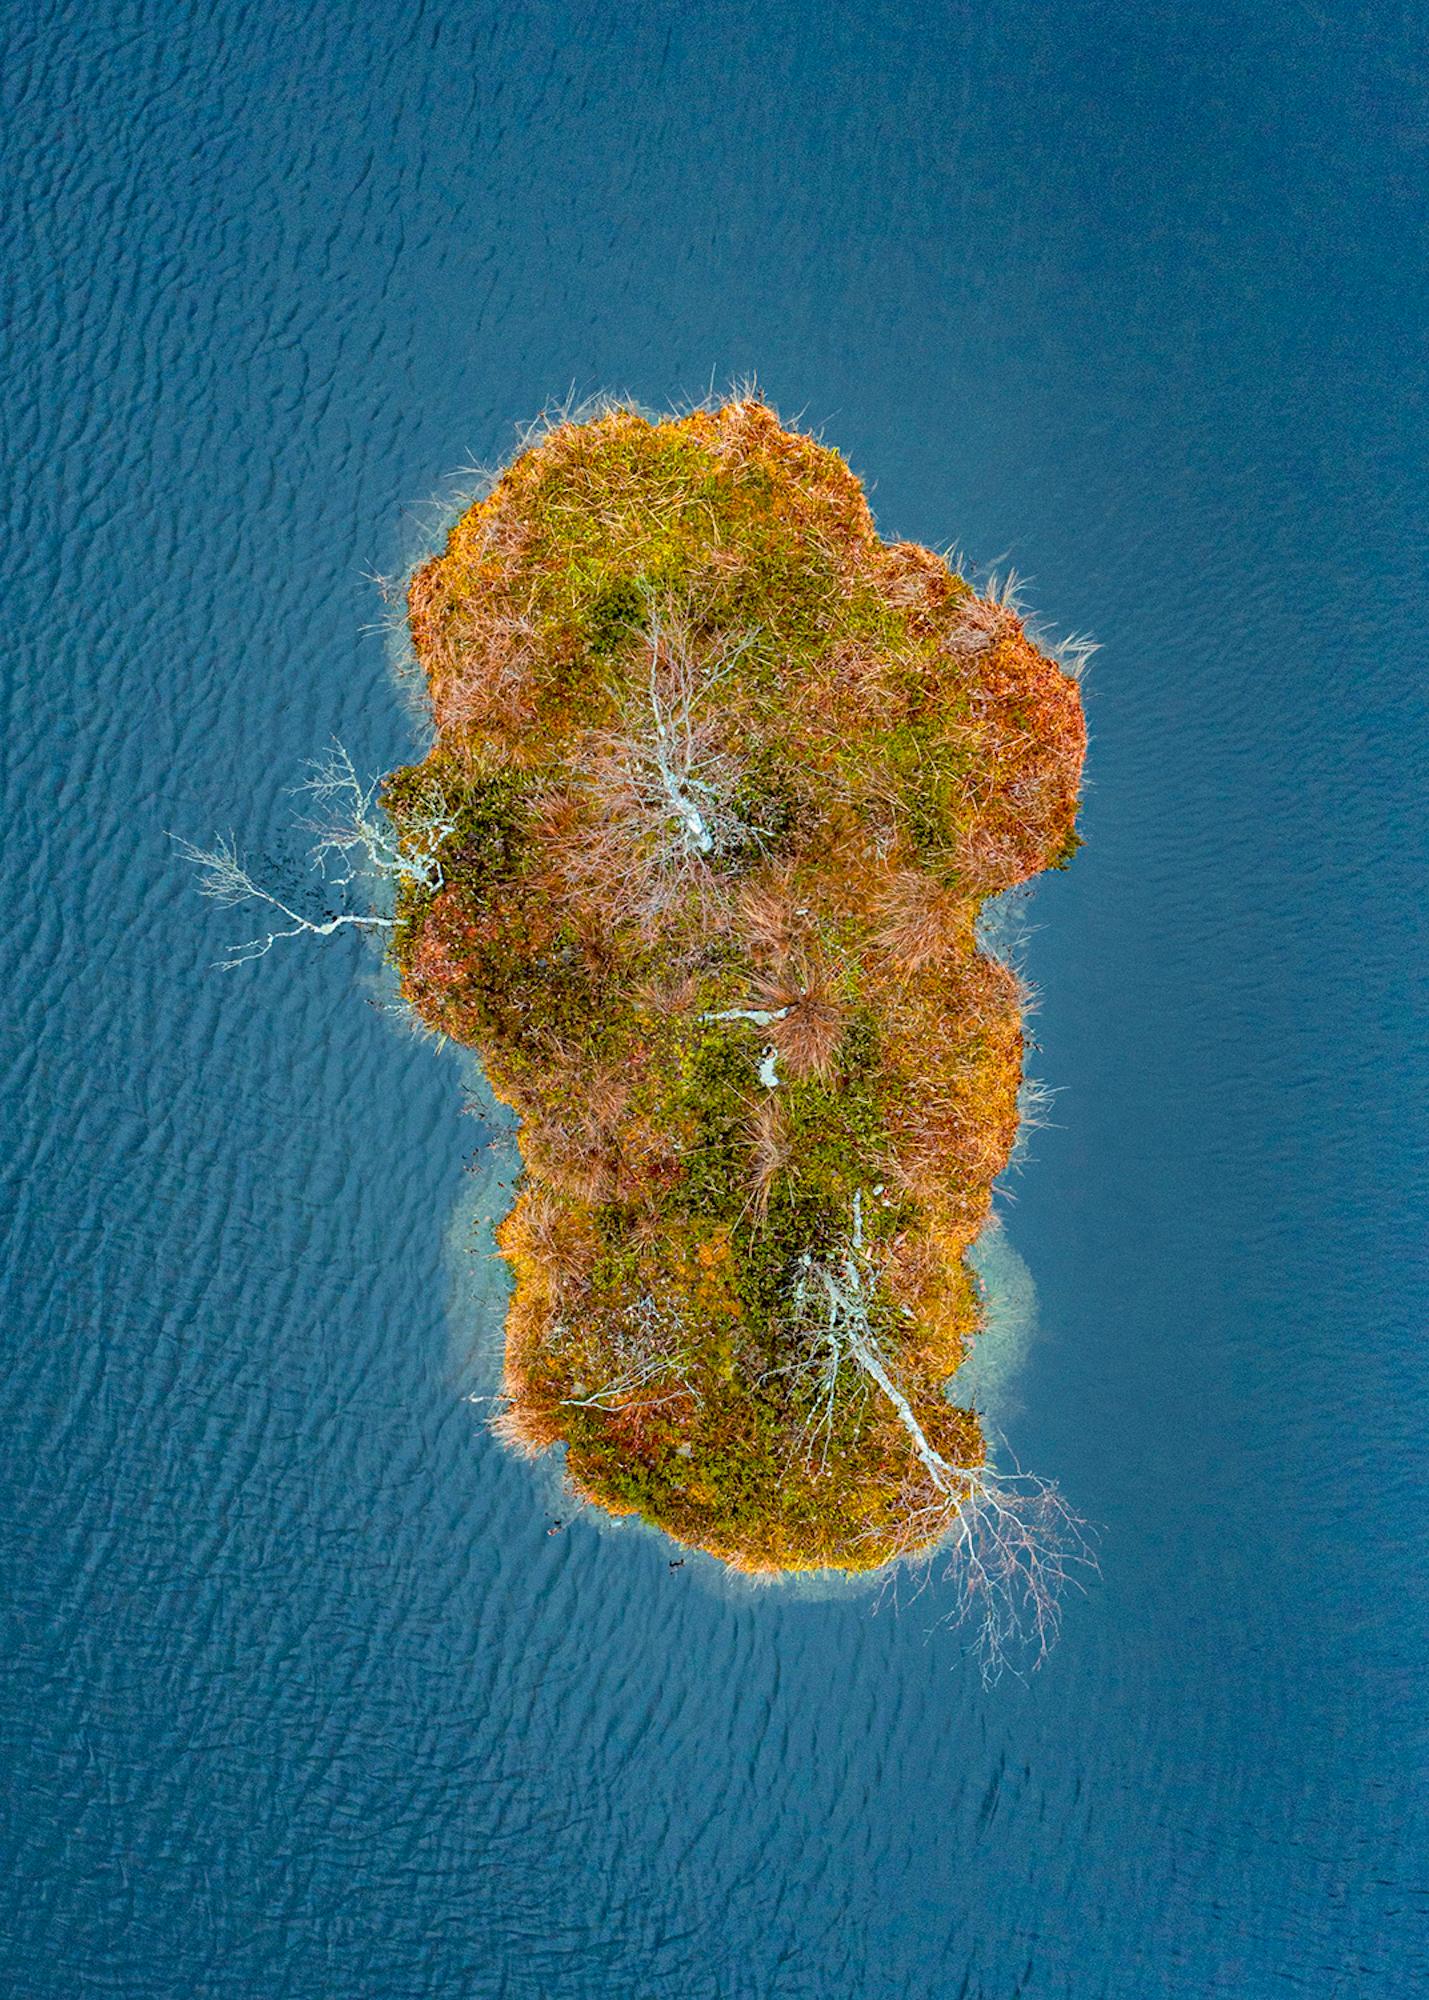 The Bog Islands 006 is a limited-edition photograph by German contemporary artist Bernhard Lang. 
Available print sizes:
- 19.7 x 14.7 inches (50 × 37.5 cm): edition of 8
- 27.5 x 19.7 inches (70 × 50 cm): edition of 8
- 35.4 x 25.2 inches (90 ×